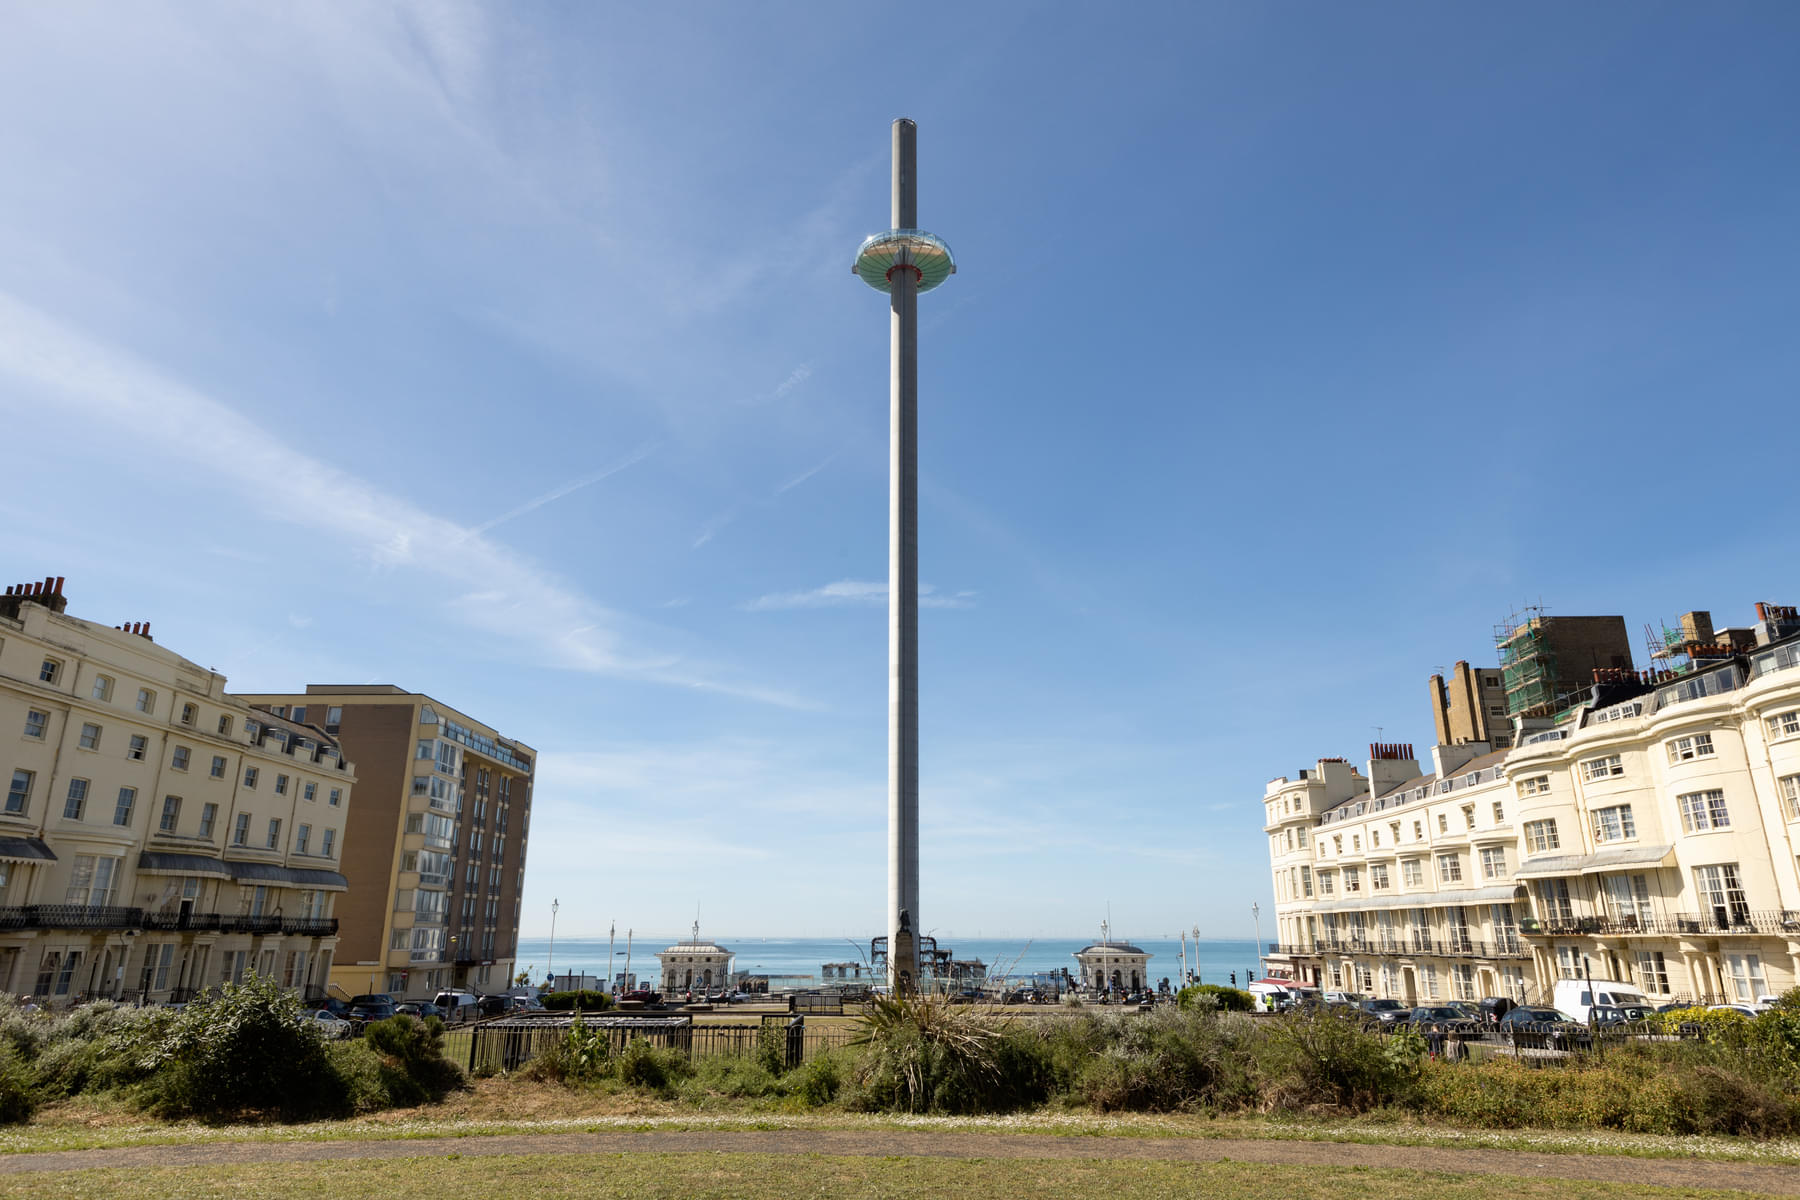 Experience the thrill of ascending 450 feet above Brighton's skyline